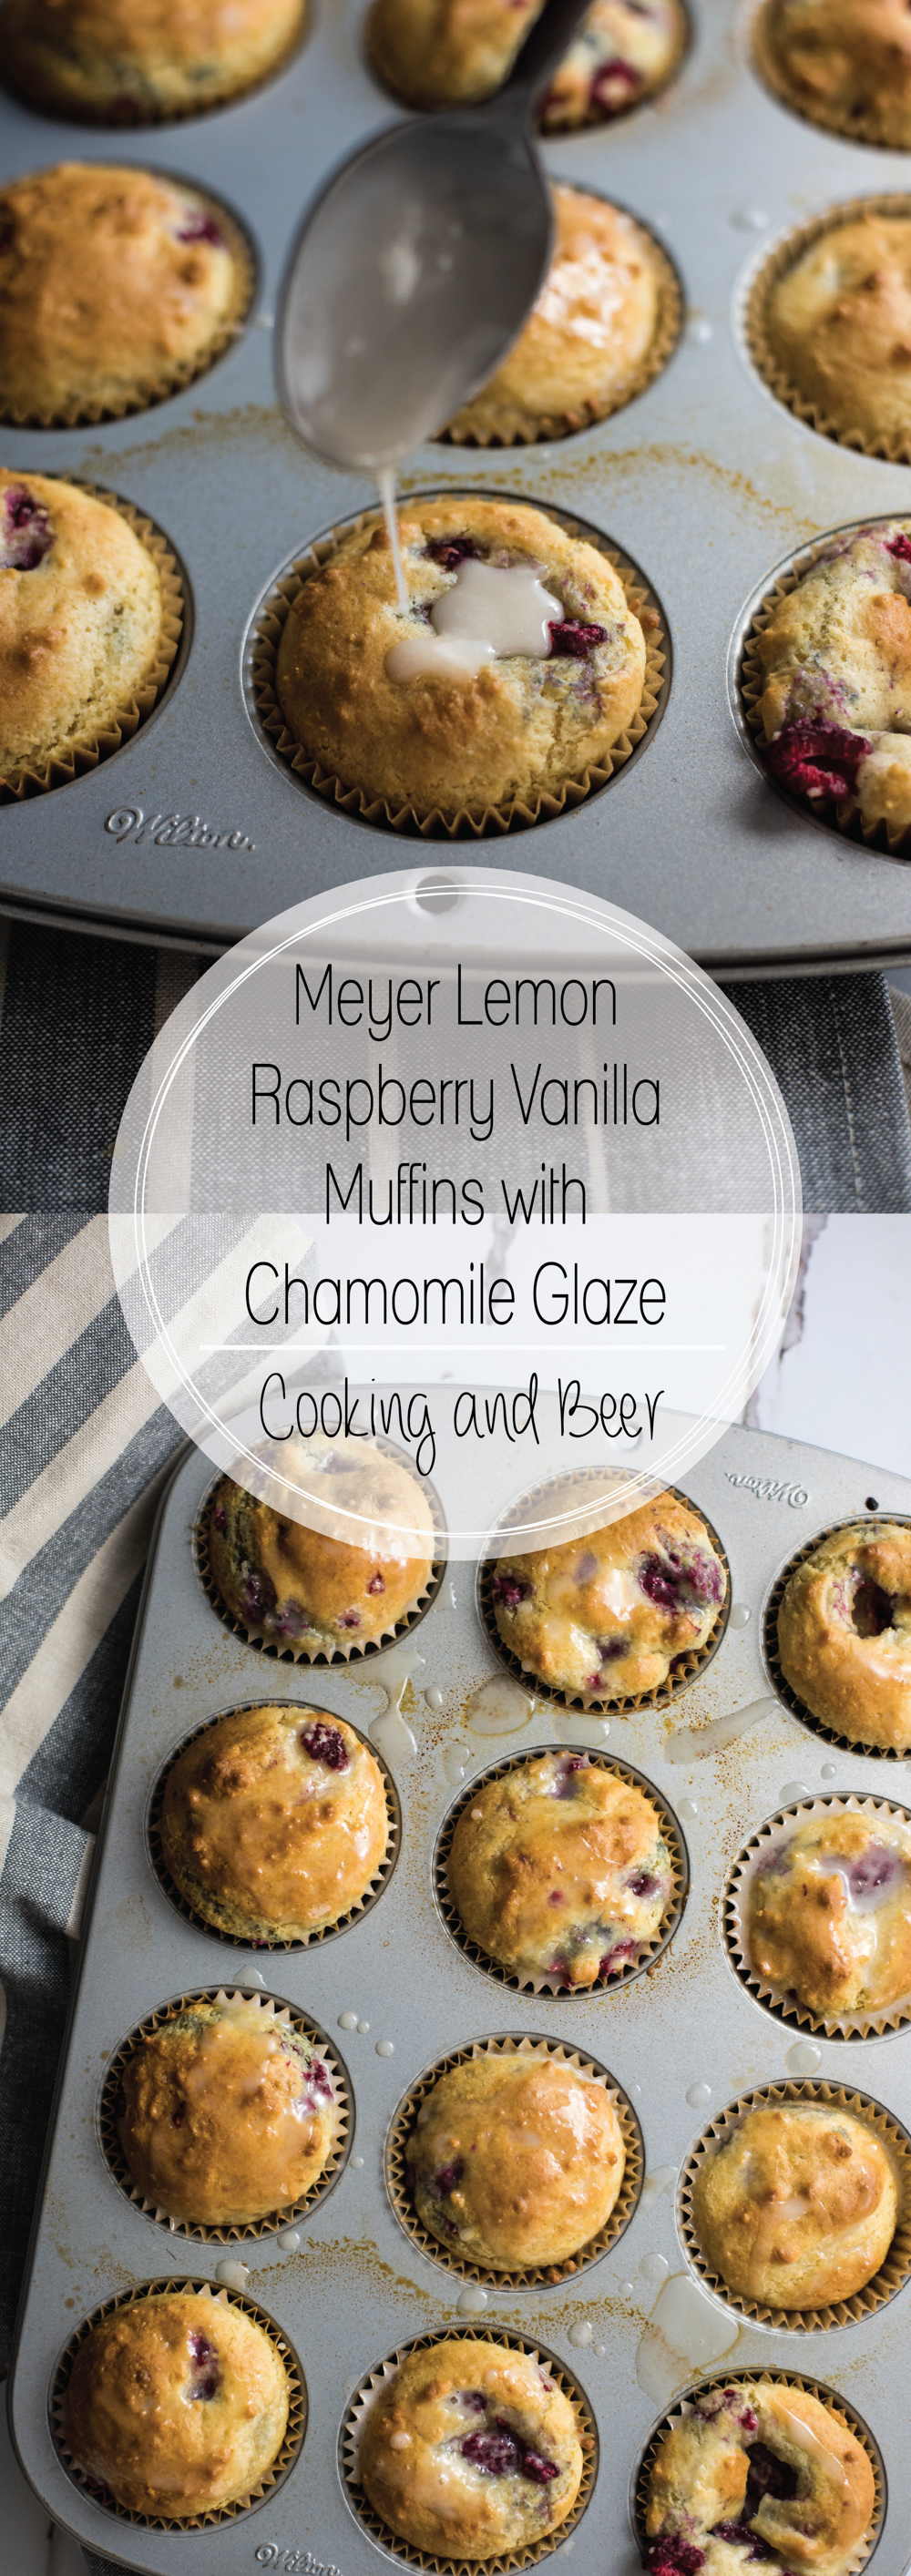 Meyer lemon raspberry vanilla muffins with chamomile glaze are the perfect recipe to whip up on Sunday morning. They are bursting with flavor!